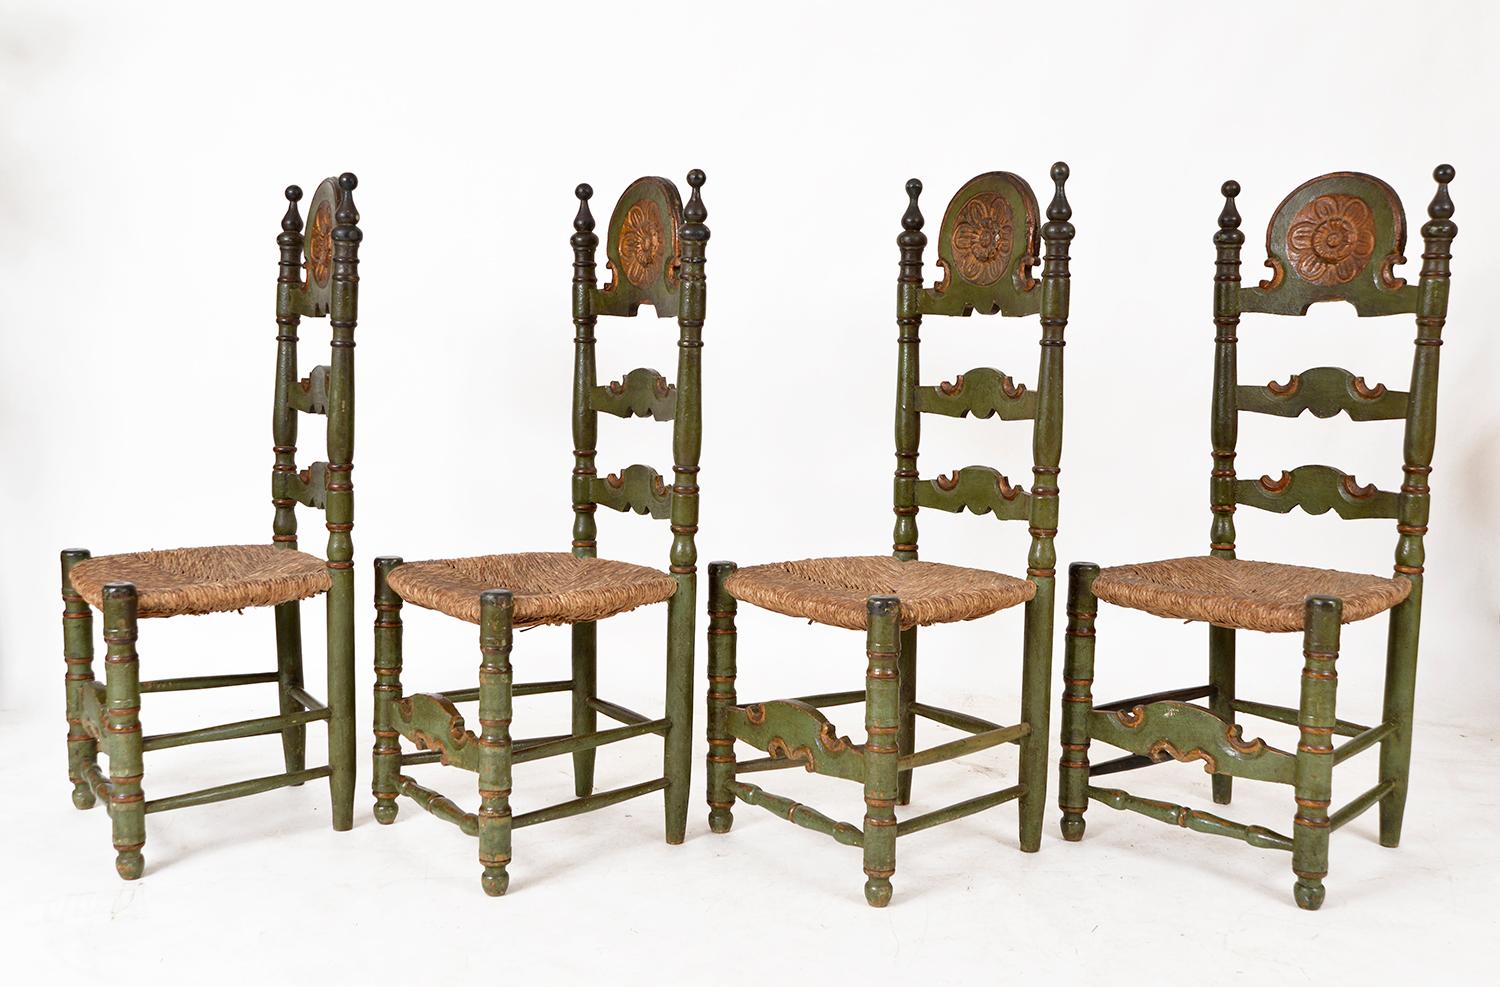 Hand-Woven Antique Set 4 Spanish Polychrome Dining Chairs Giltwood Green Painted Folk Art For Sale